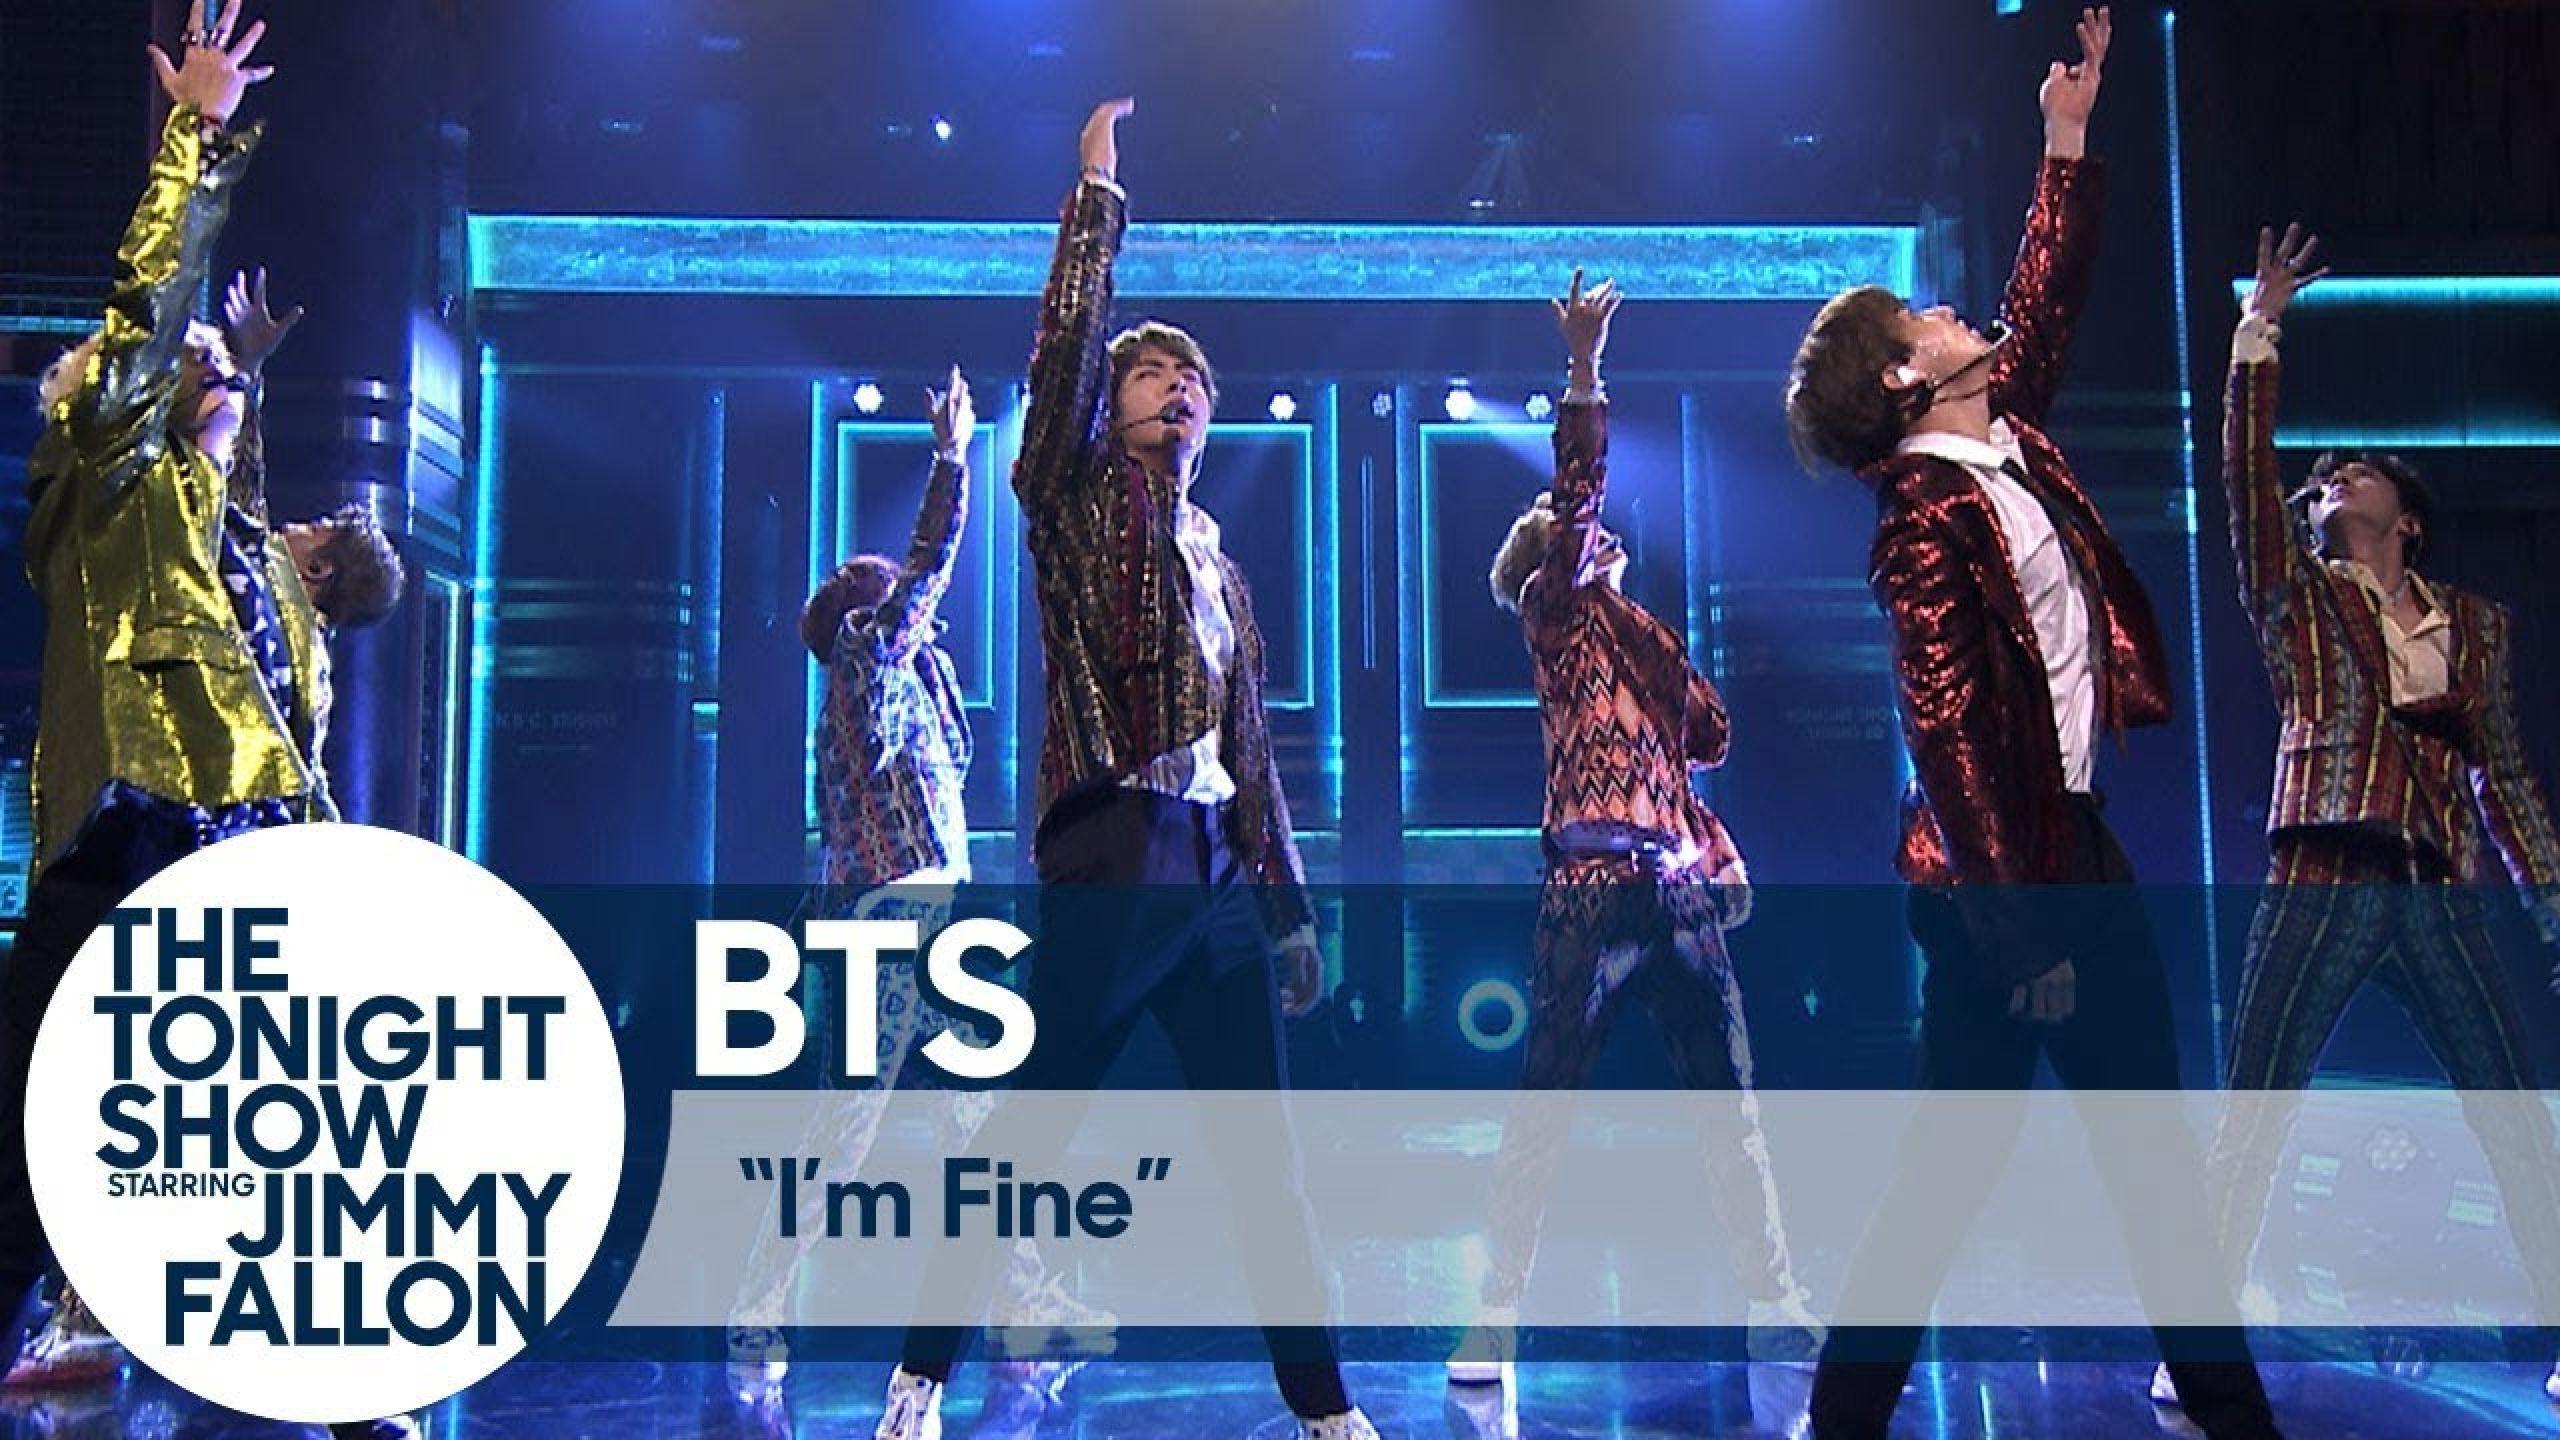 YouTube video BTS Performs I'm Fine on The Tonight Show Fashion